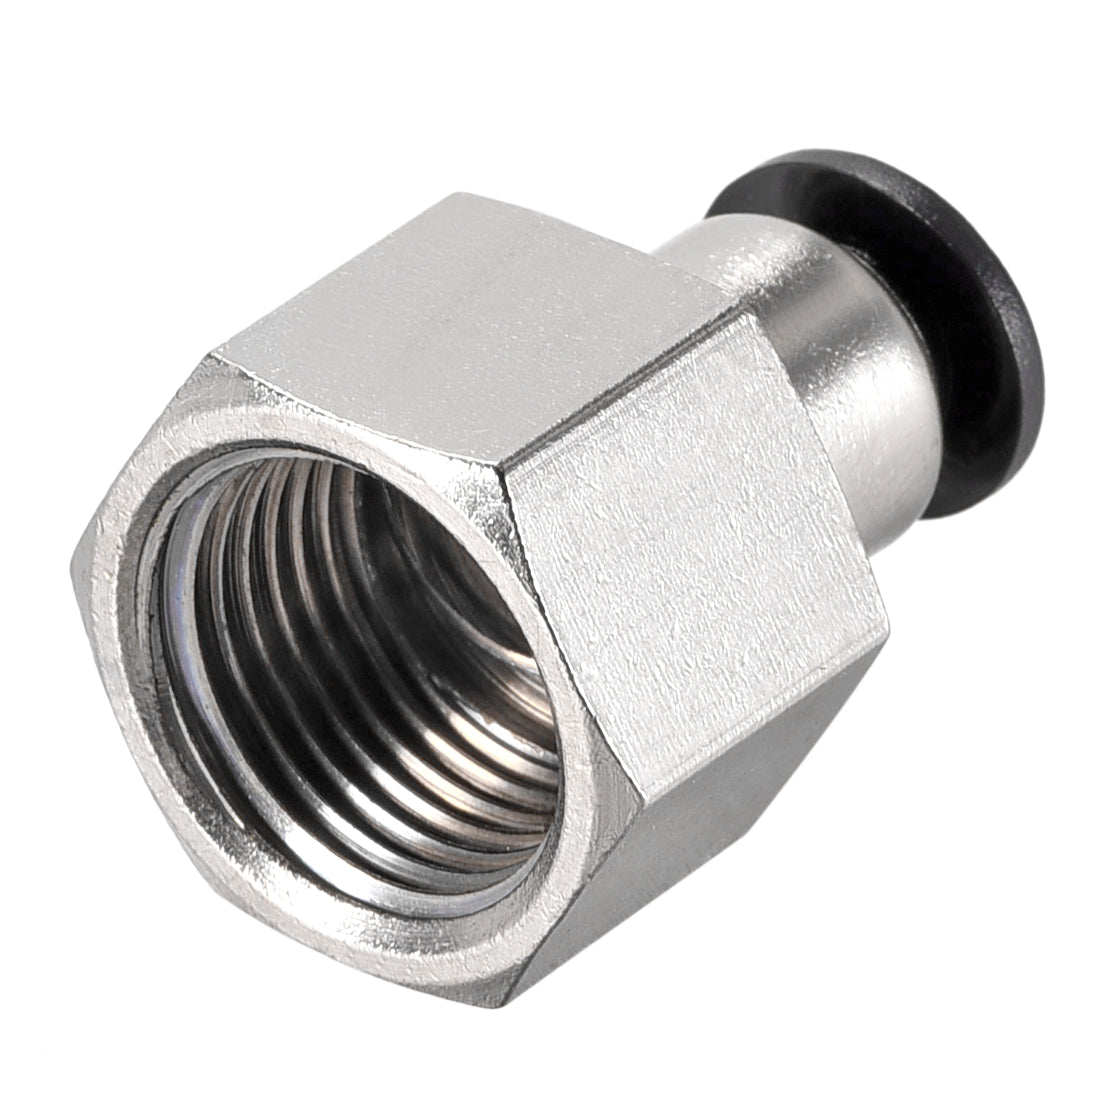 uxcell Uxcell Push to Connect Tube Fitting Adapter 6mm Tube OD x 3/8BSPT Female Straight Pneumatic Connecter Pipe Fitting